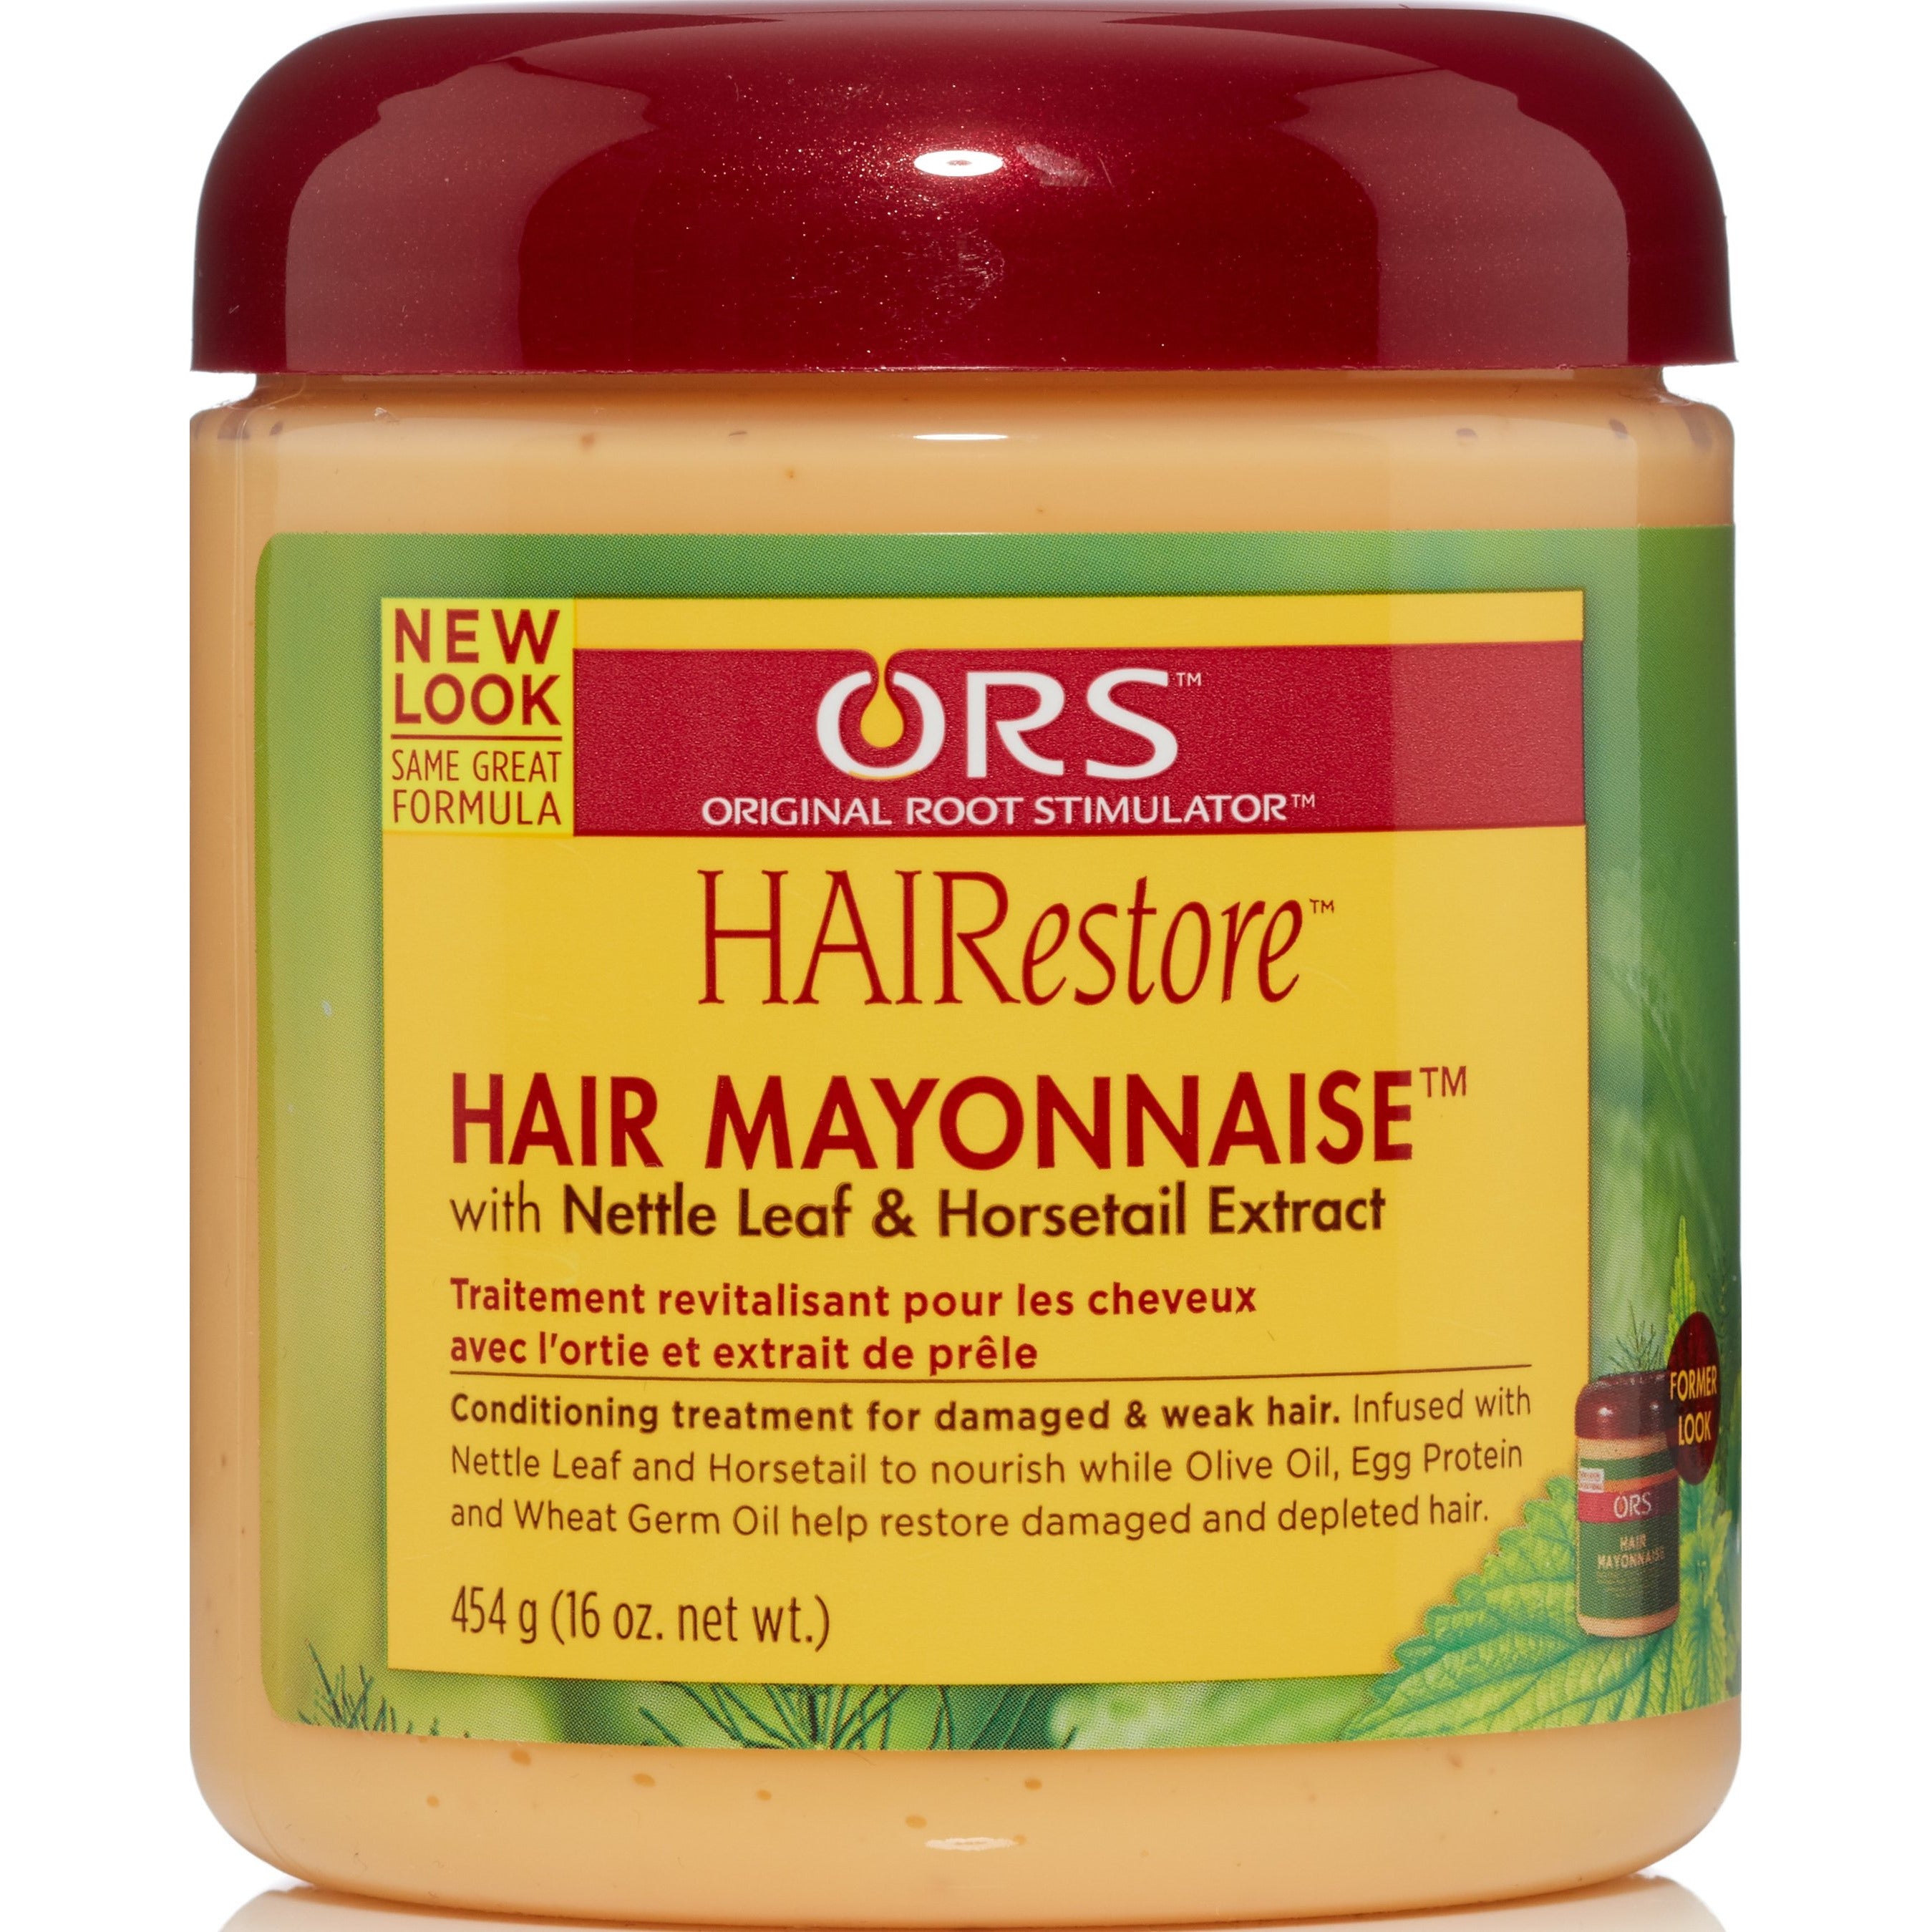 4th Ave Market: ORS HAIRestore Hair Mayonnaise with Nettle Leaf and Horsetail Extract